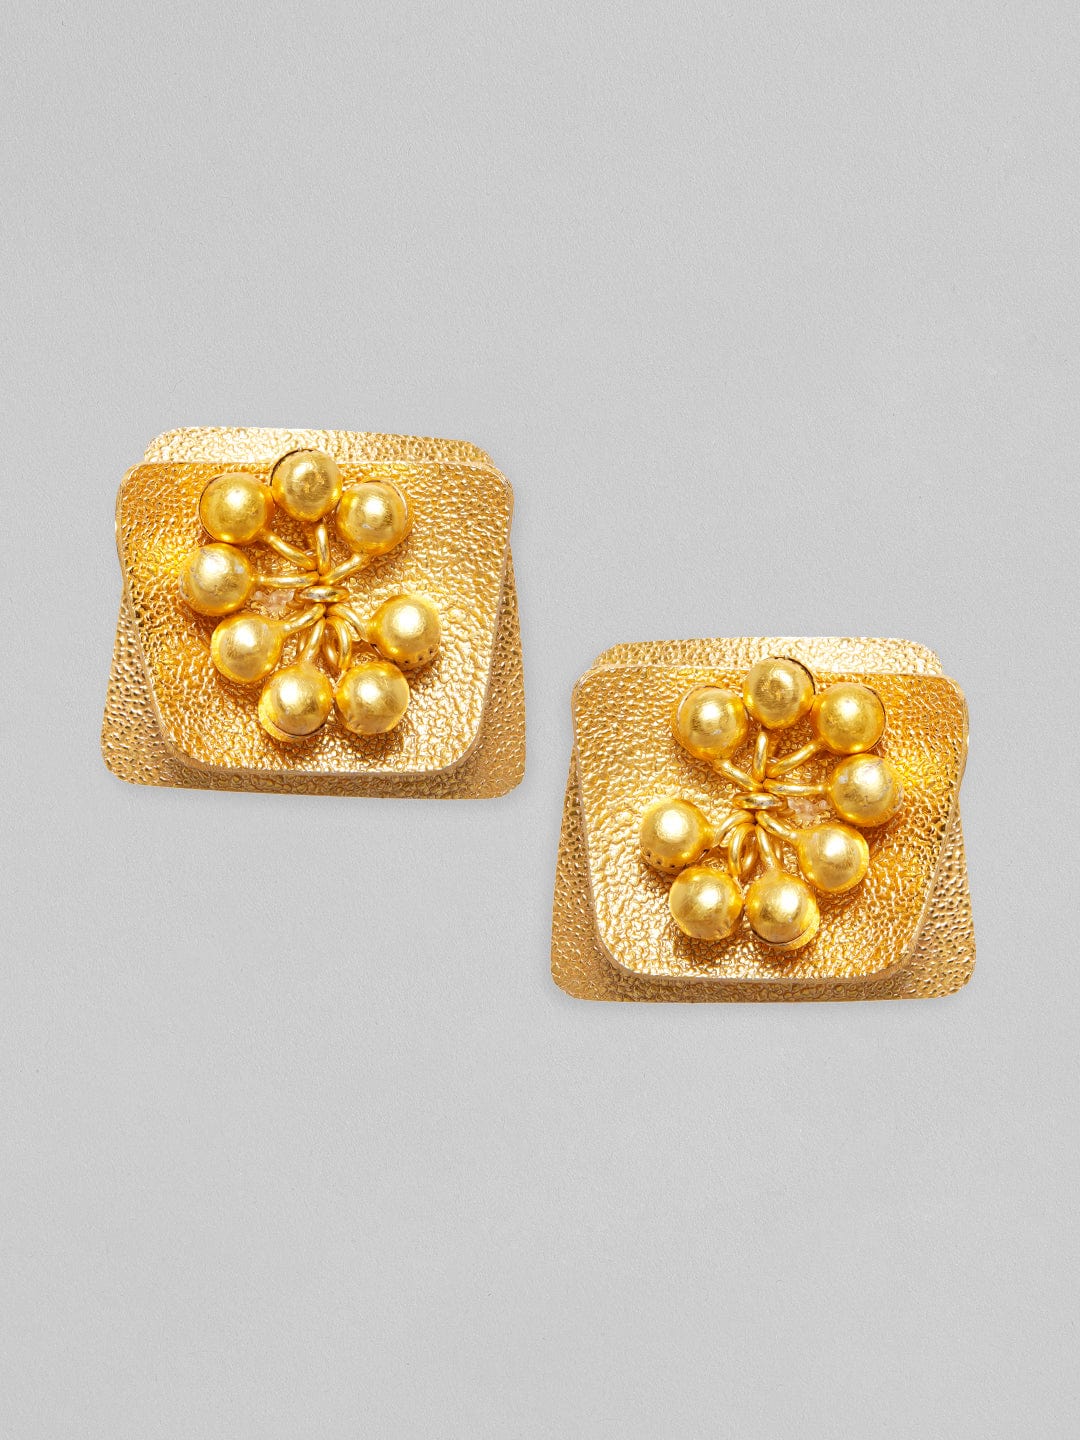 Rubans 24K Gold Plated Handcrafted Stud Earrings With Square Design, Pearls And Beads Earrings